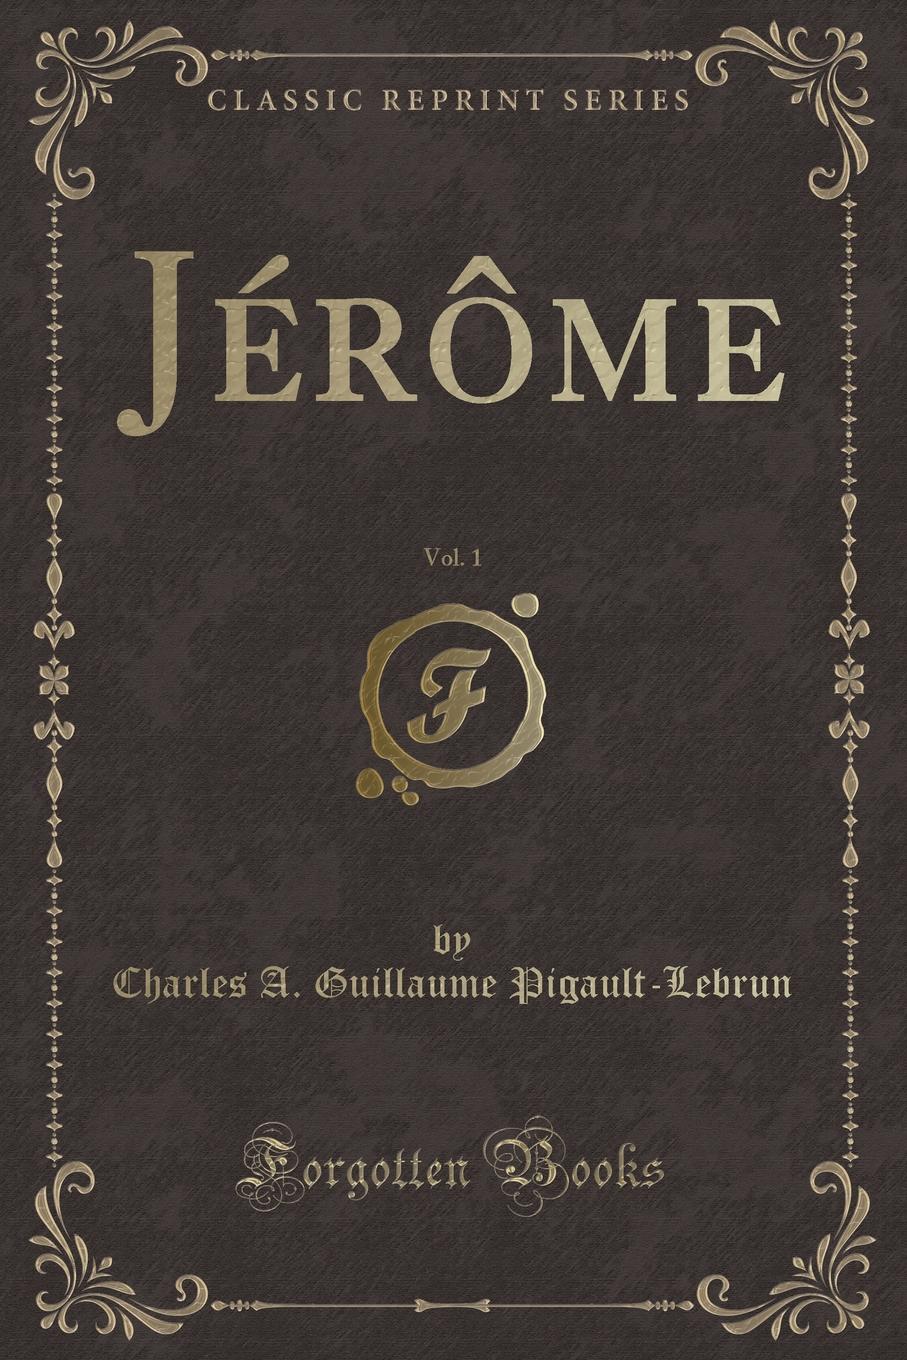 Charles A. Guillaume Pigault-Lebrun Jerome, Vol. 1 (Classic Reprint)